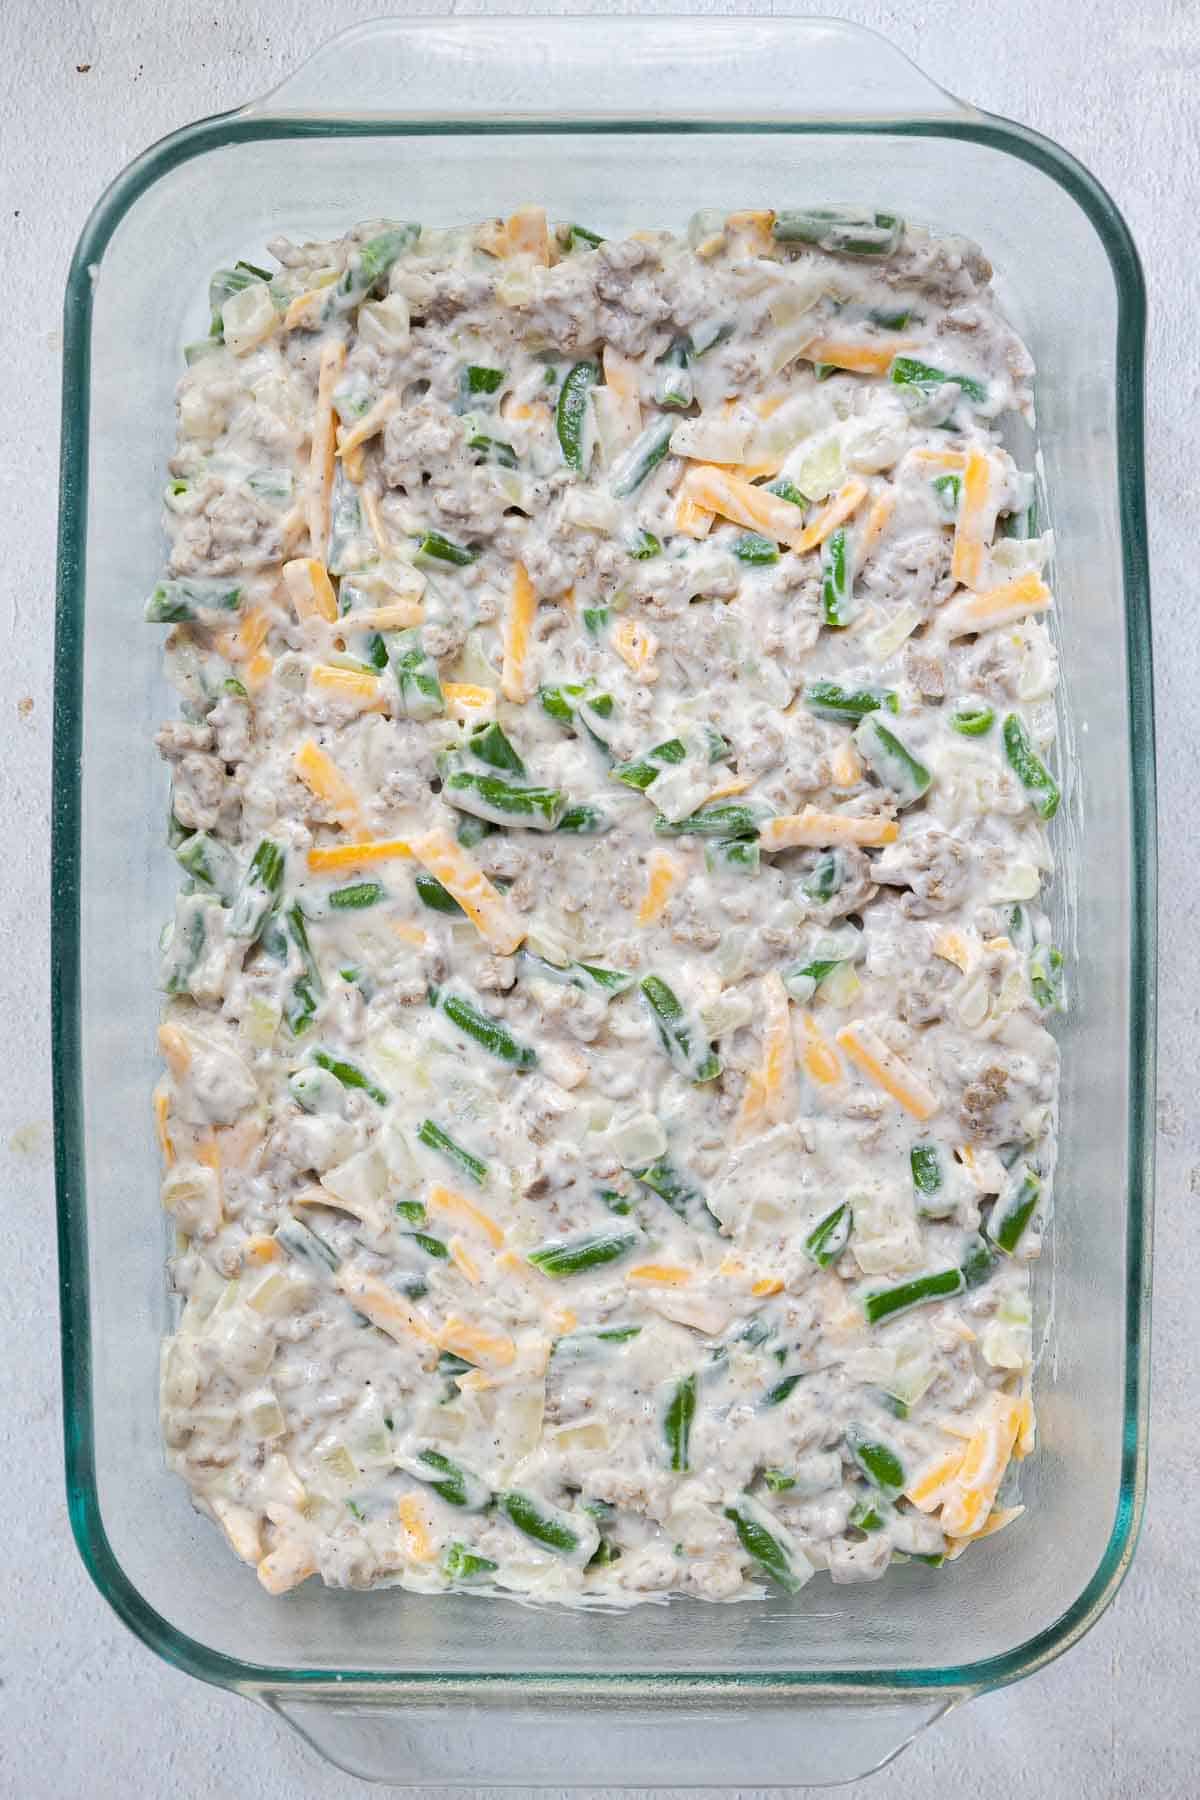 The green bean and meat mixture is spread evenly in the bottom of a 9 by 13 inch casserole dish.